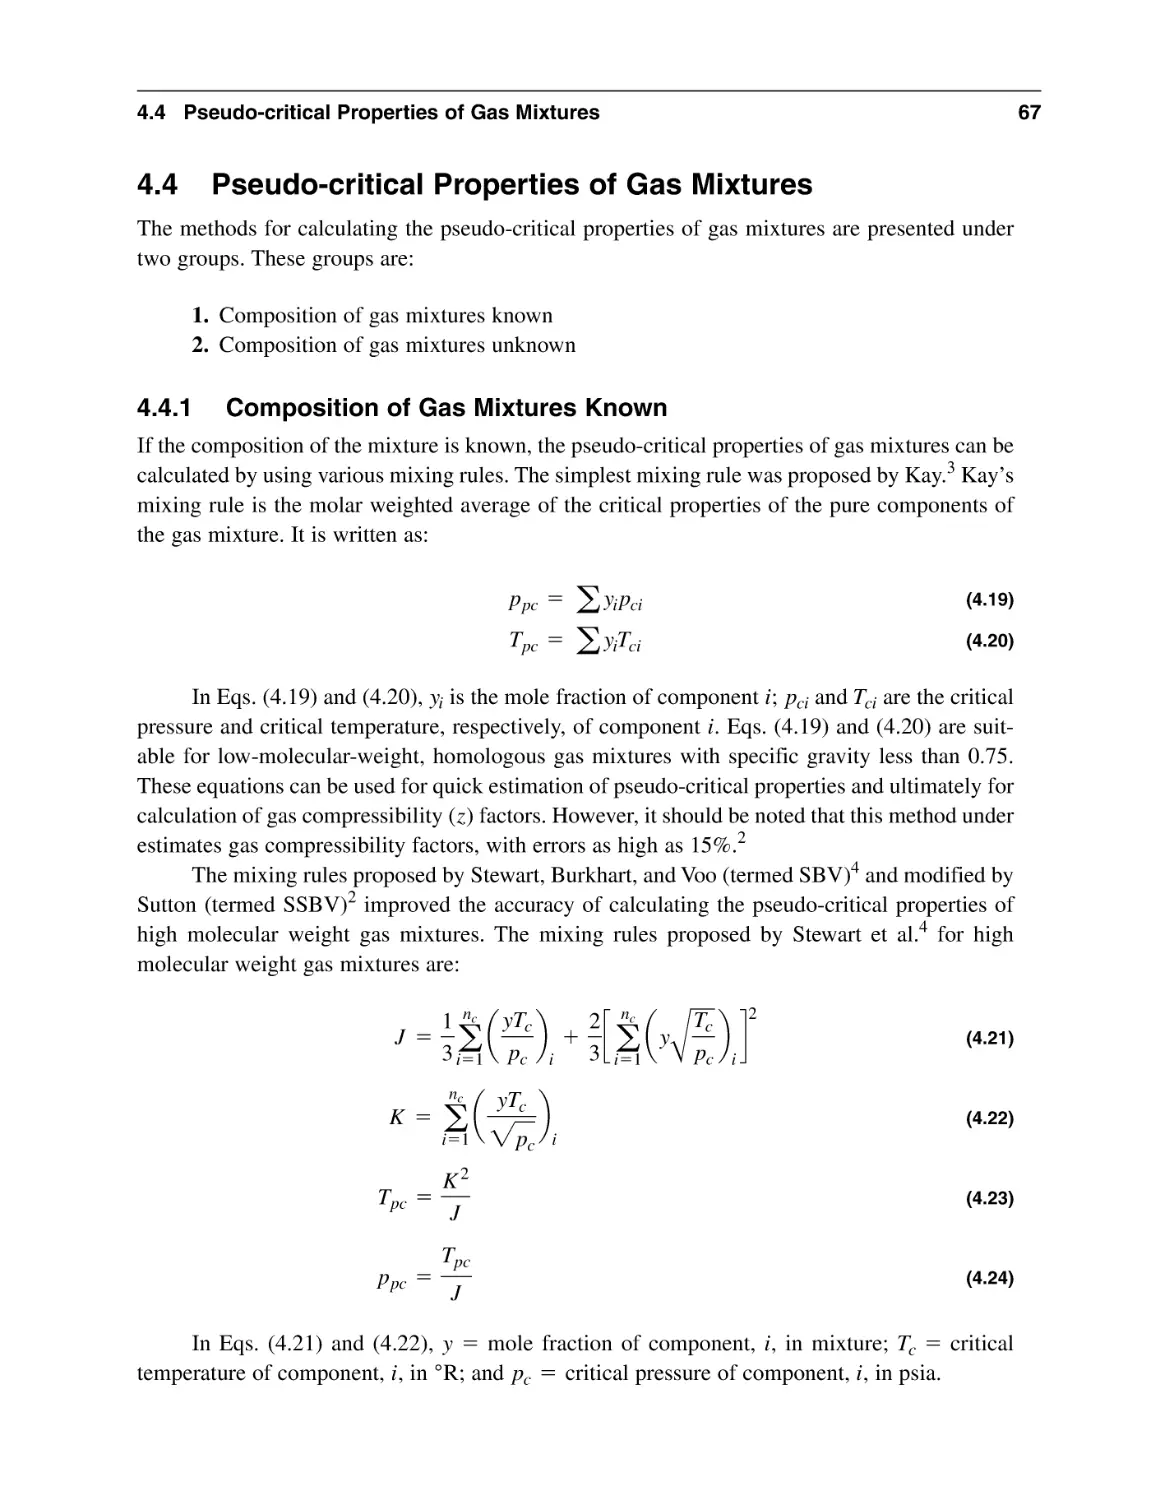 4.4 Pseudo-critical Properties of Gas Mixtures
4.4.1 Composition of Gas Mixtures Known